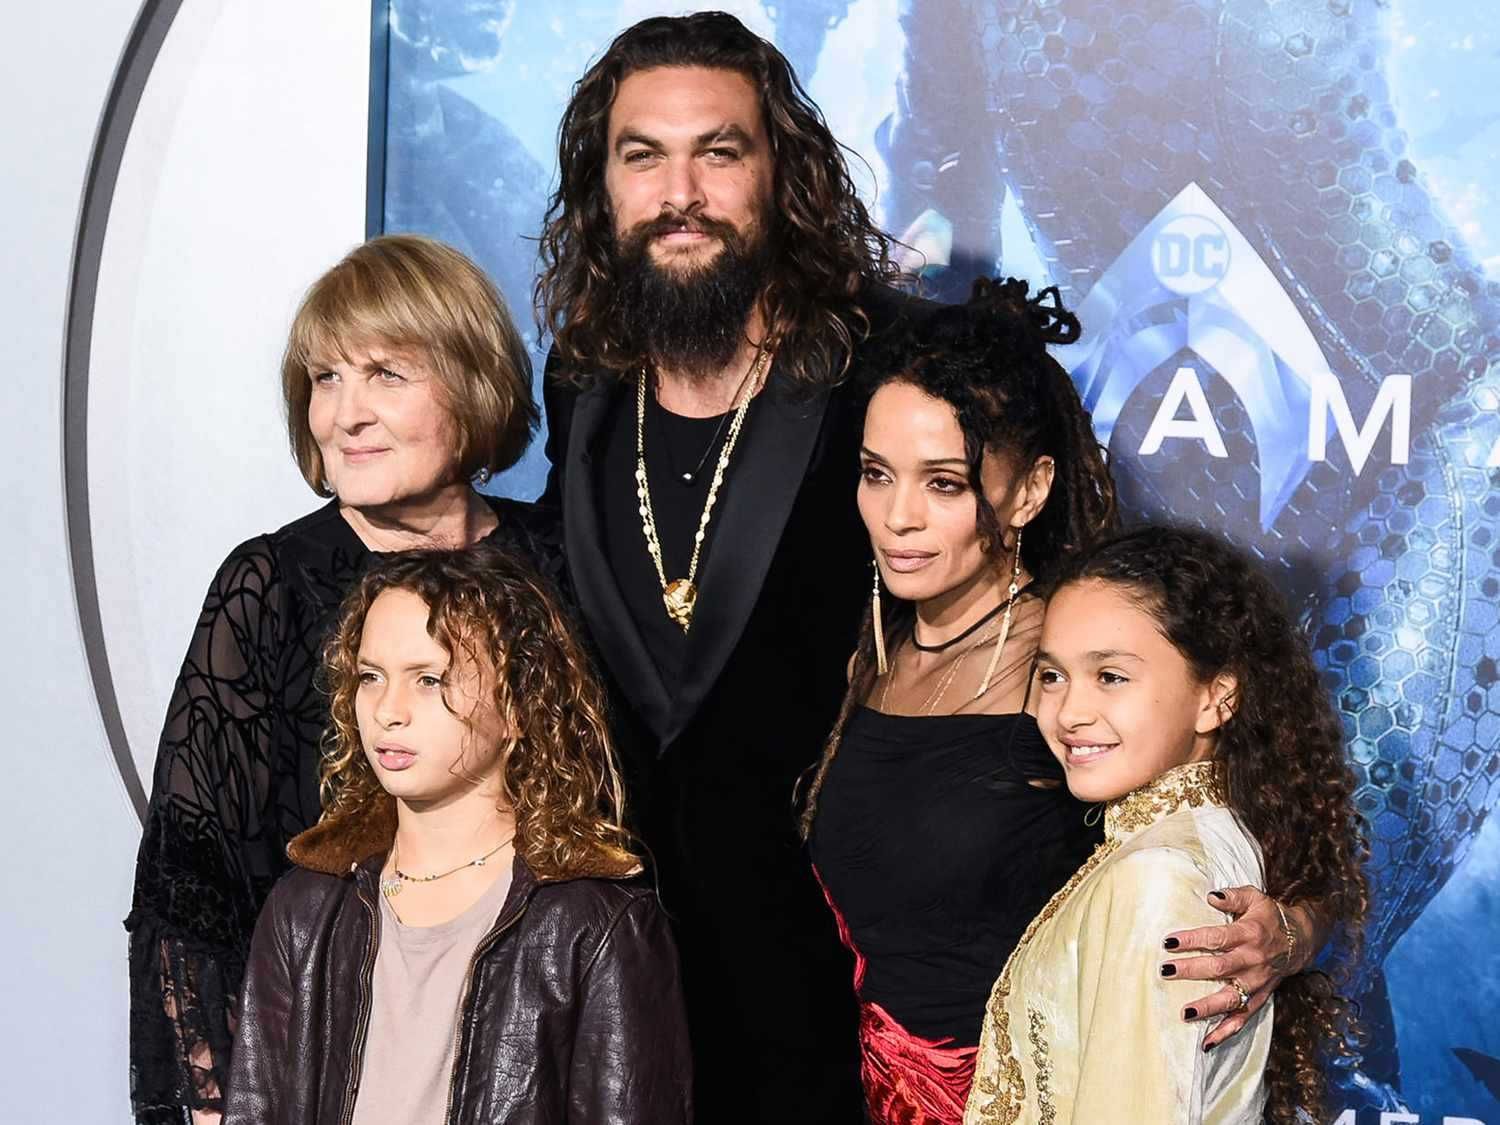 Jason Momoa with his family (Source: People)